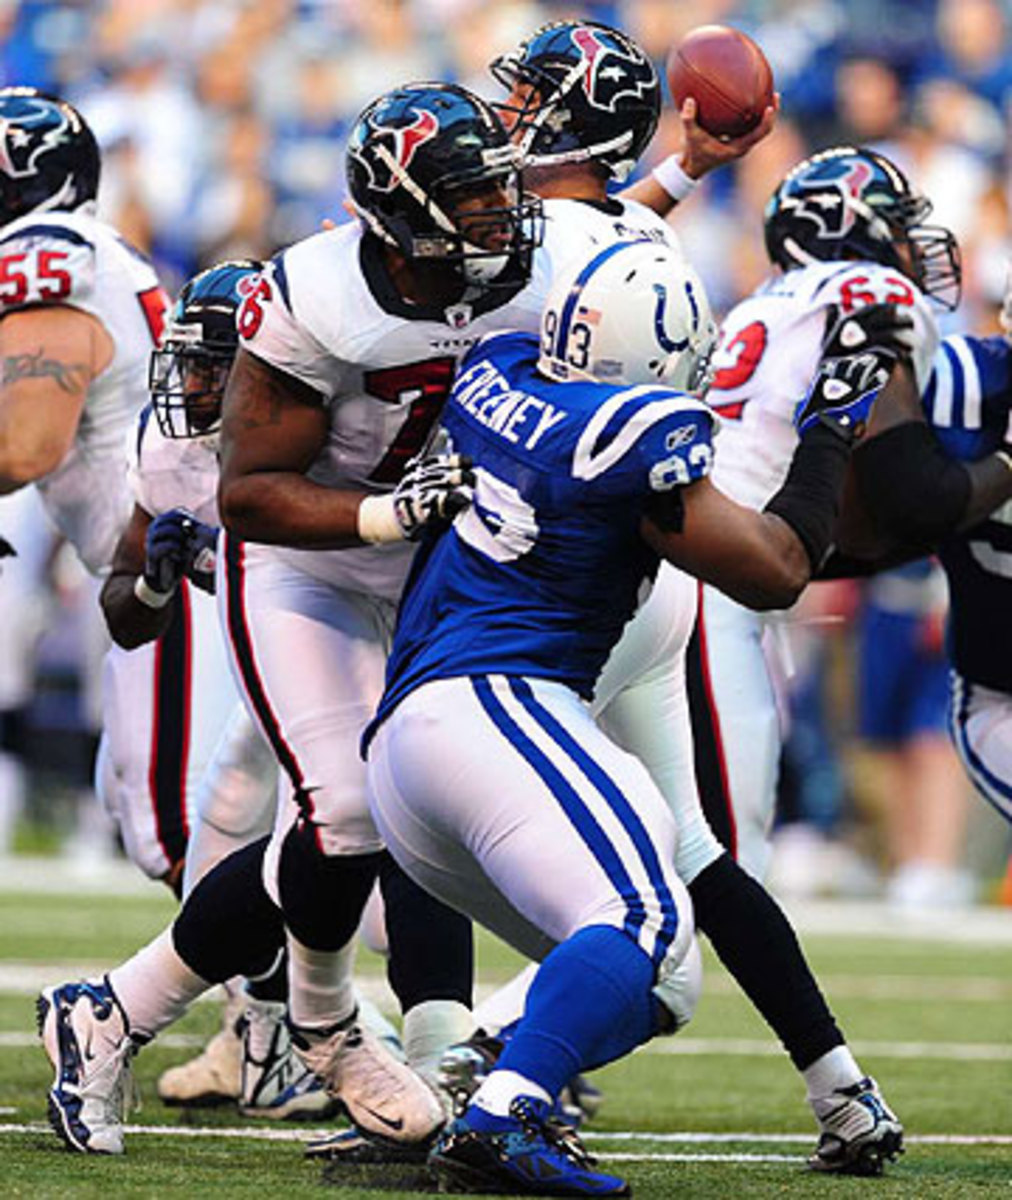 To prepare to play Duane Brown, Freeney watched every snap the two had played against each other previously, including this Colts-Texans matchup from 2009. (David E. Klutho/SI)